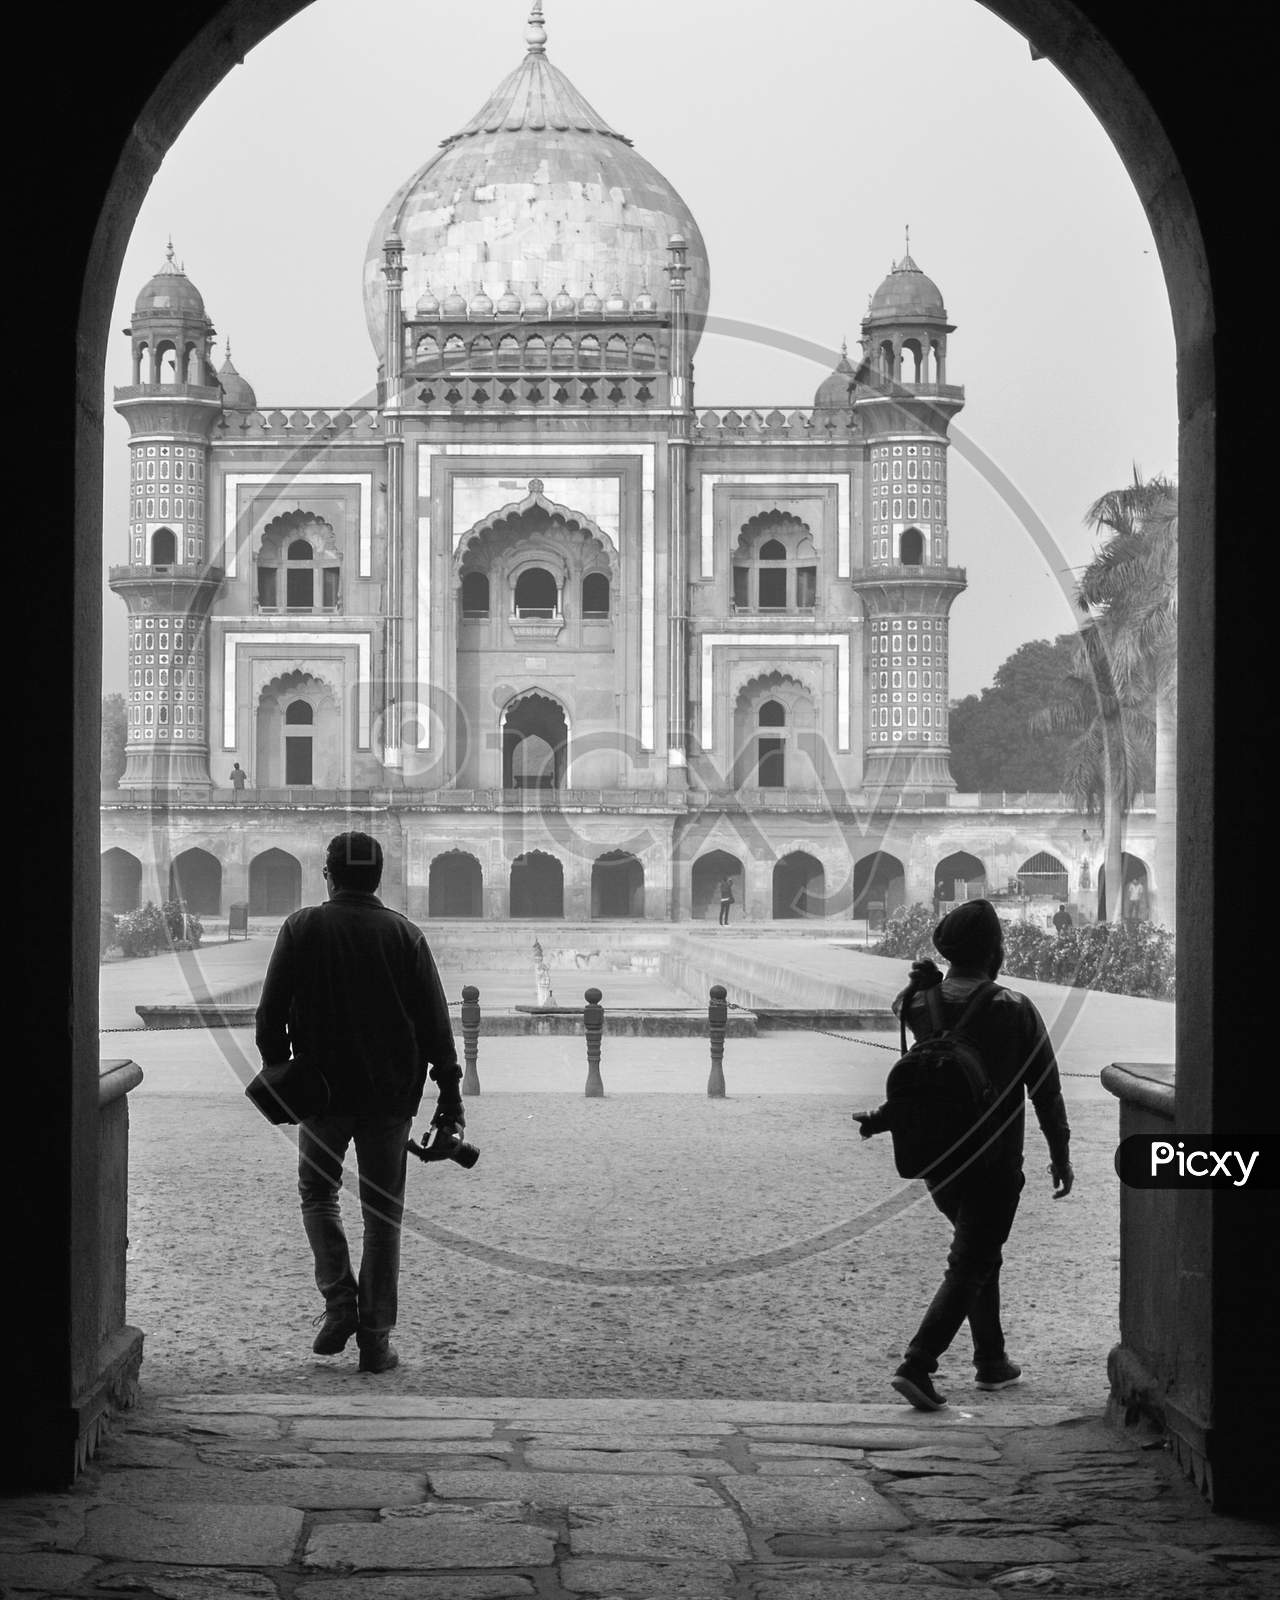 Two Photography Student Walking With Camera Trough The Main Gate,Entrance Of Safdarjung Tomb Memorial At Winter Morning Black And White Silhouette.